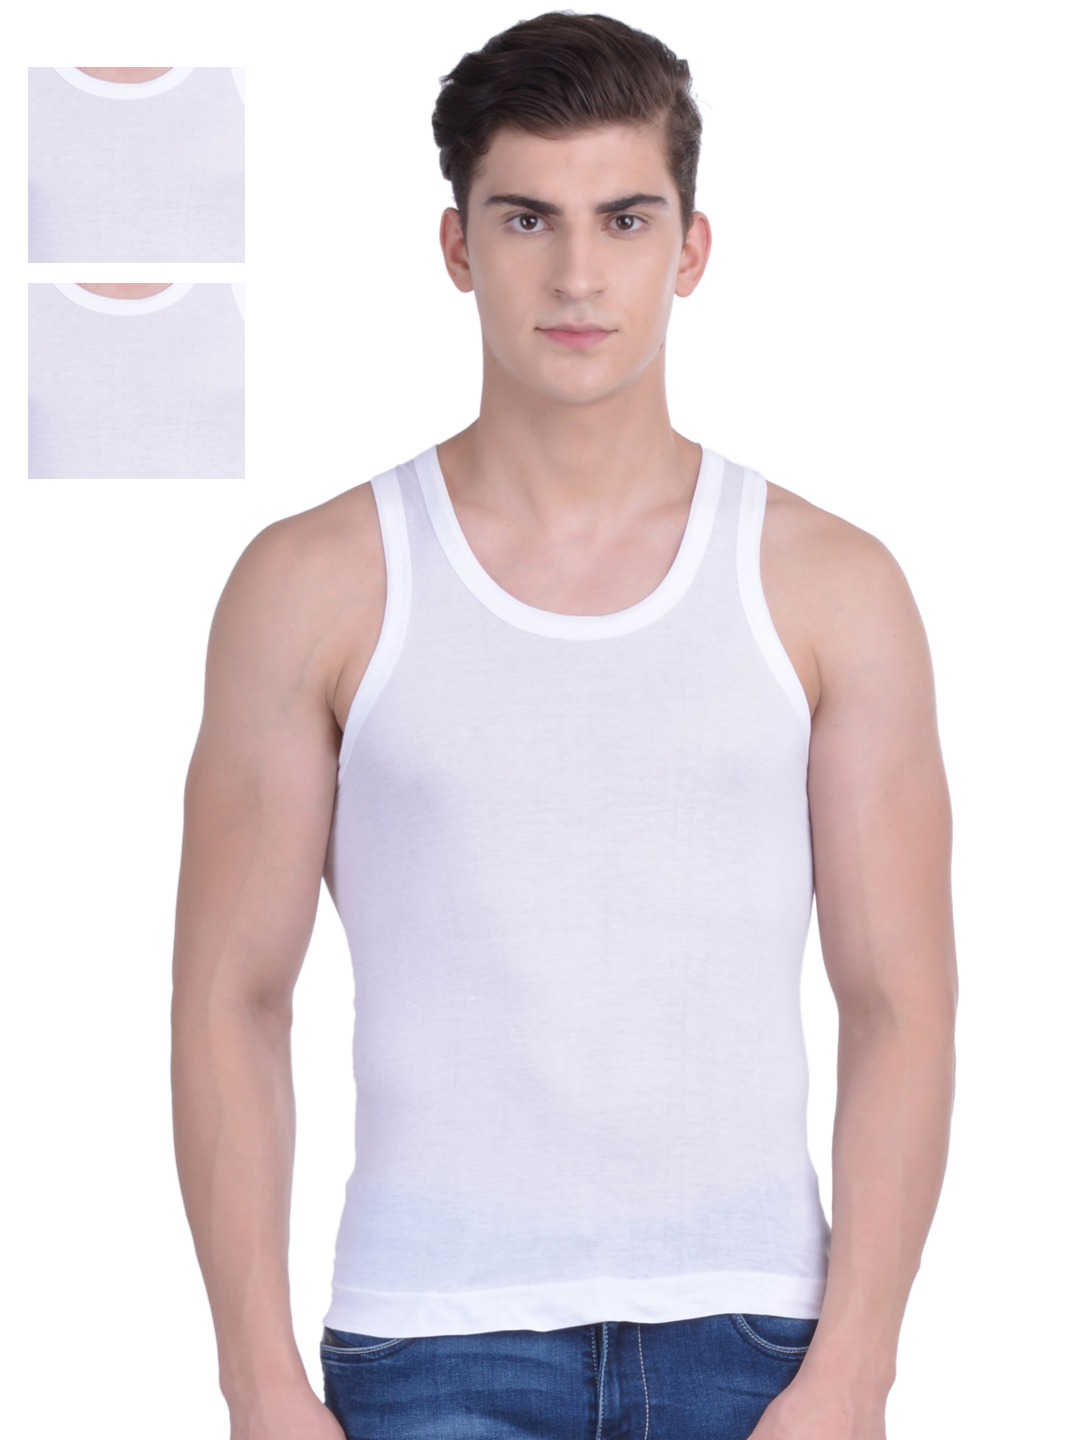 Clothing Innerwear Vests | Force NXT Men White Pack of 3 Assorted Innerwear Vests MNFF-141 - UP28574